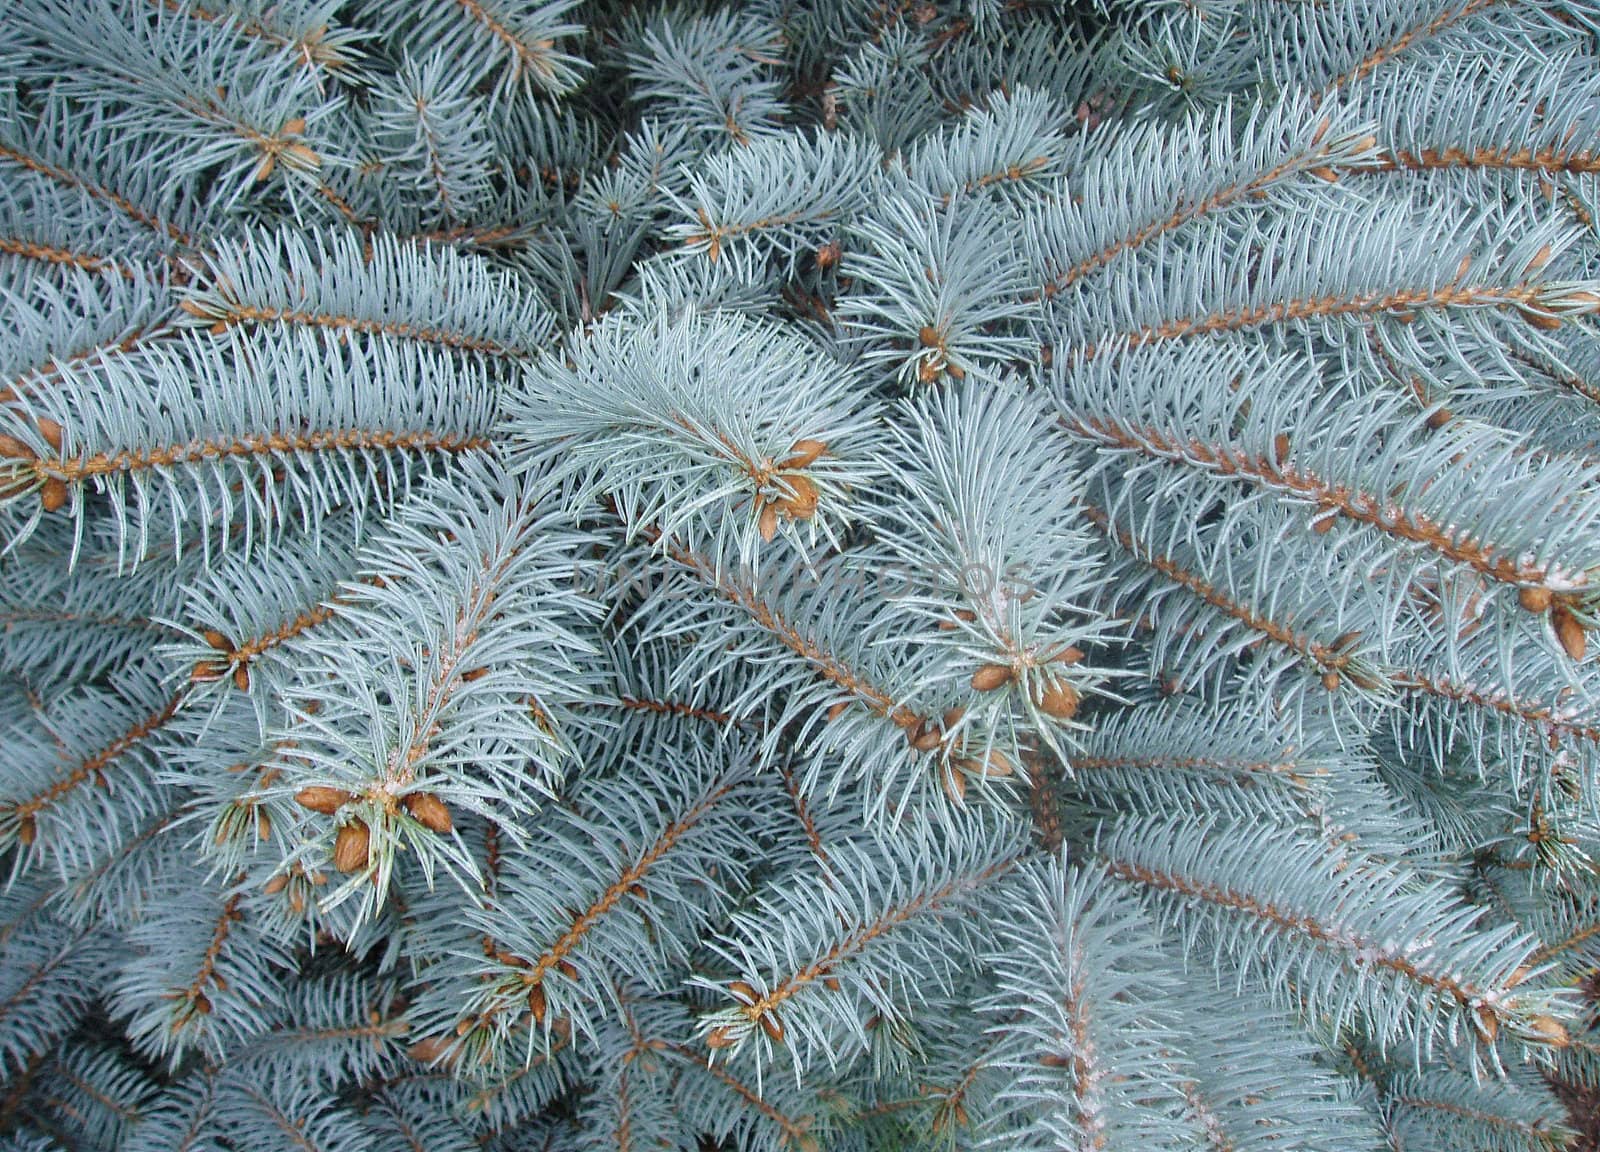 Blue spruce, cones and needles        